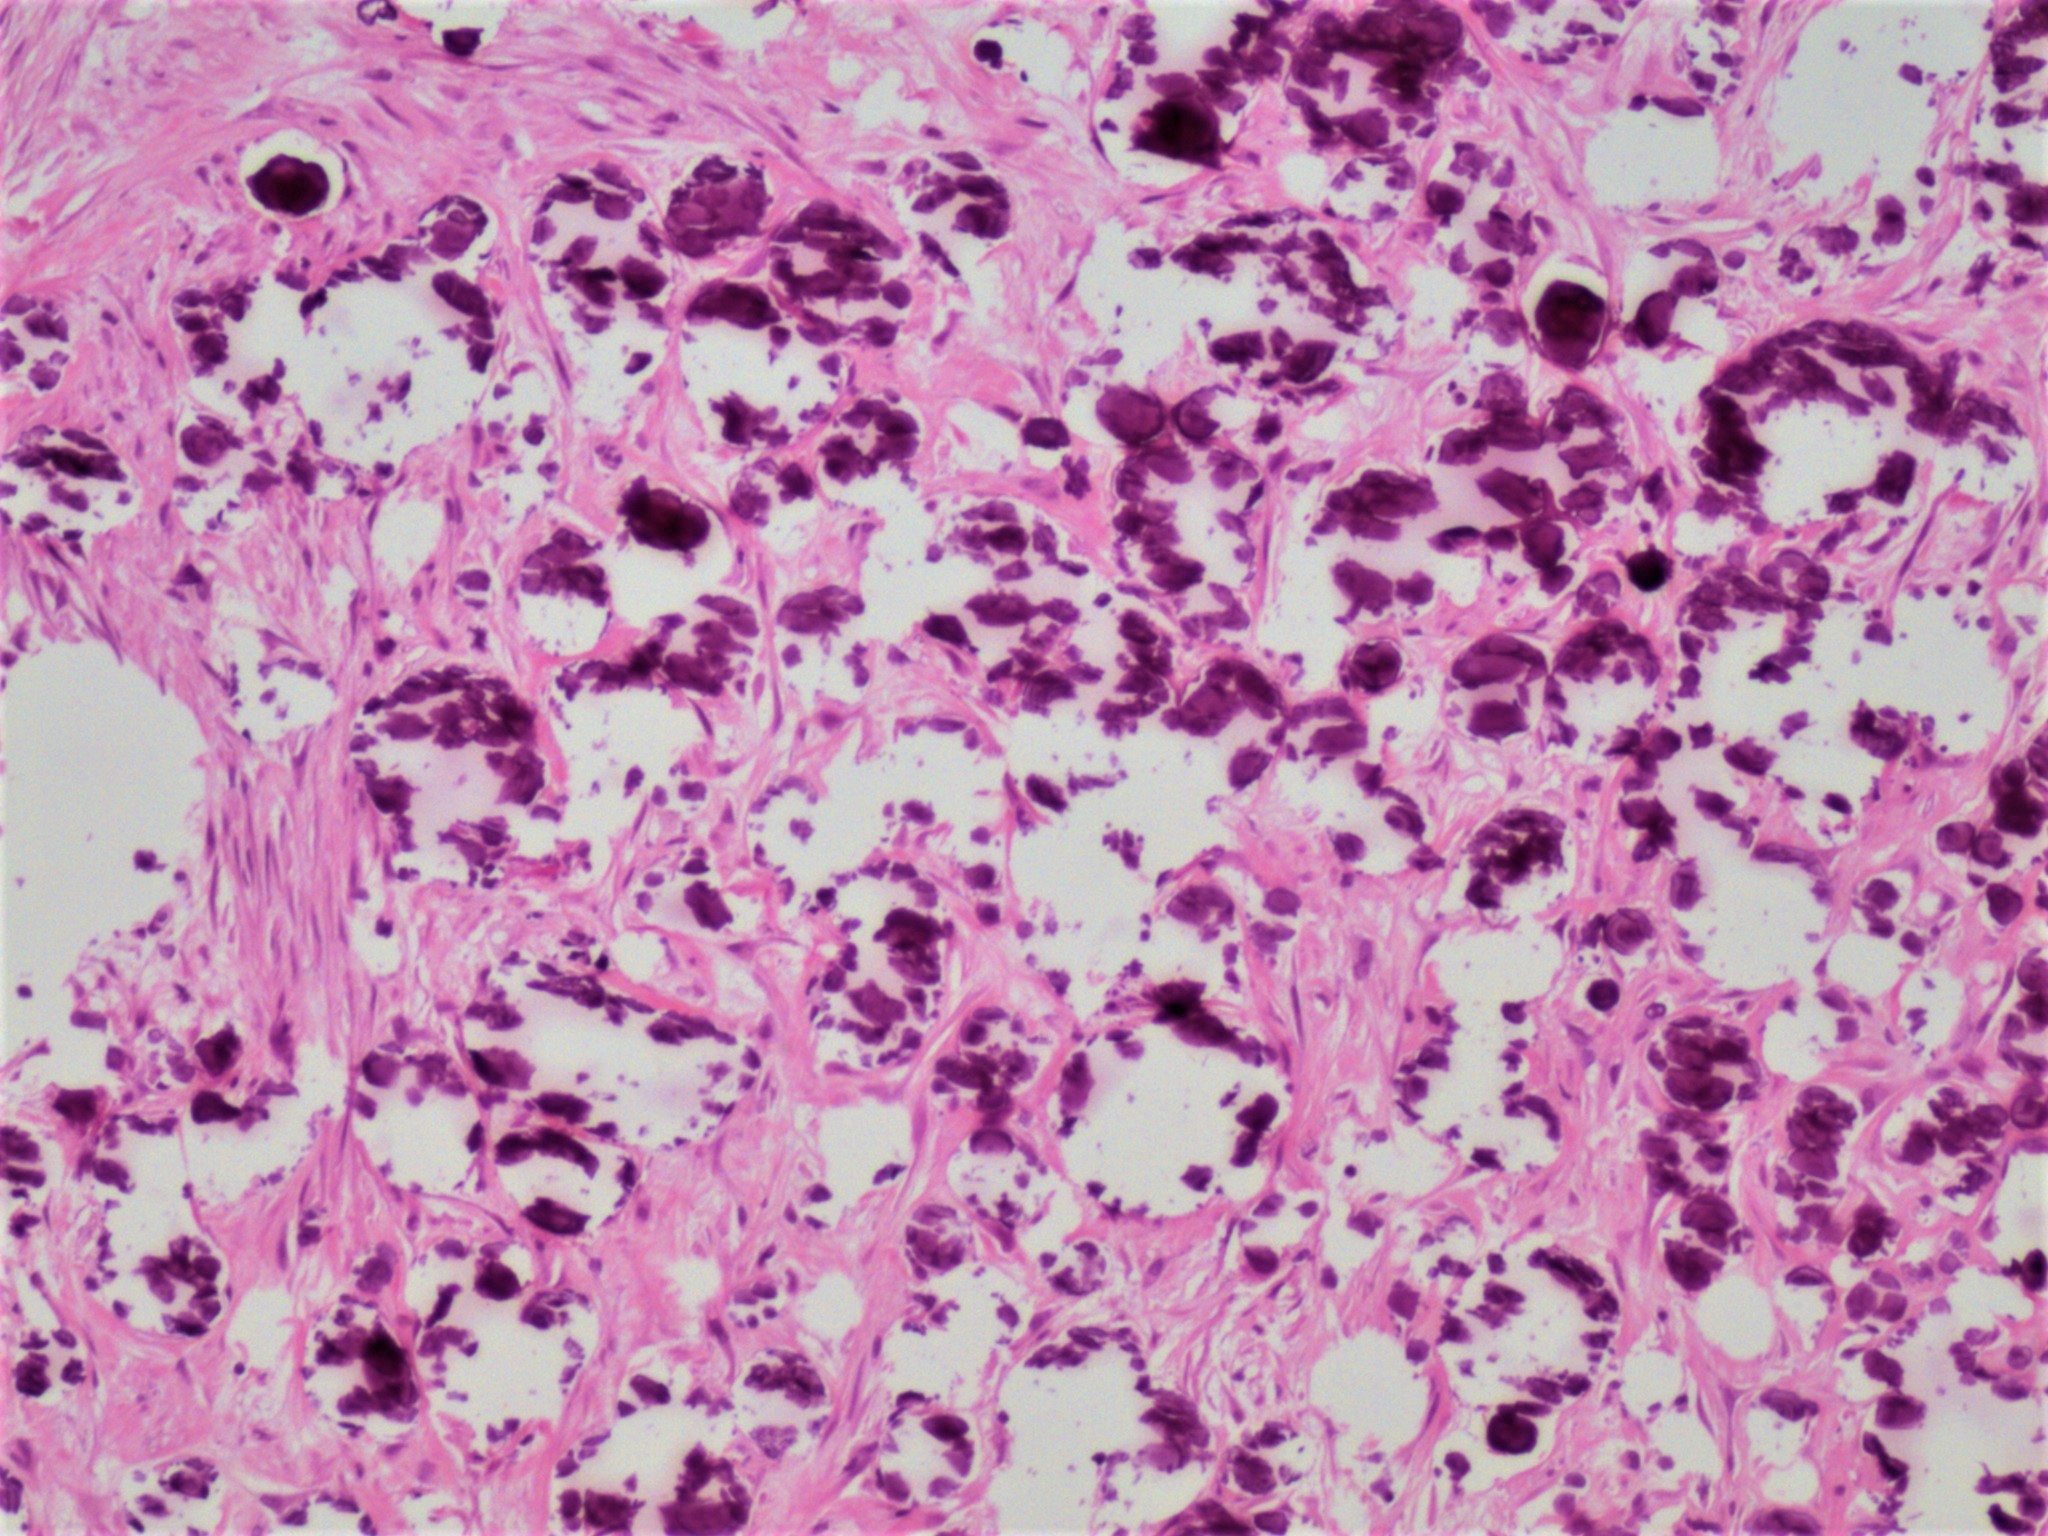 Calcifications associated with low grade serous carcinoma of the ovary